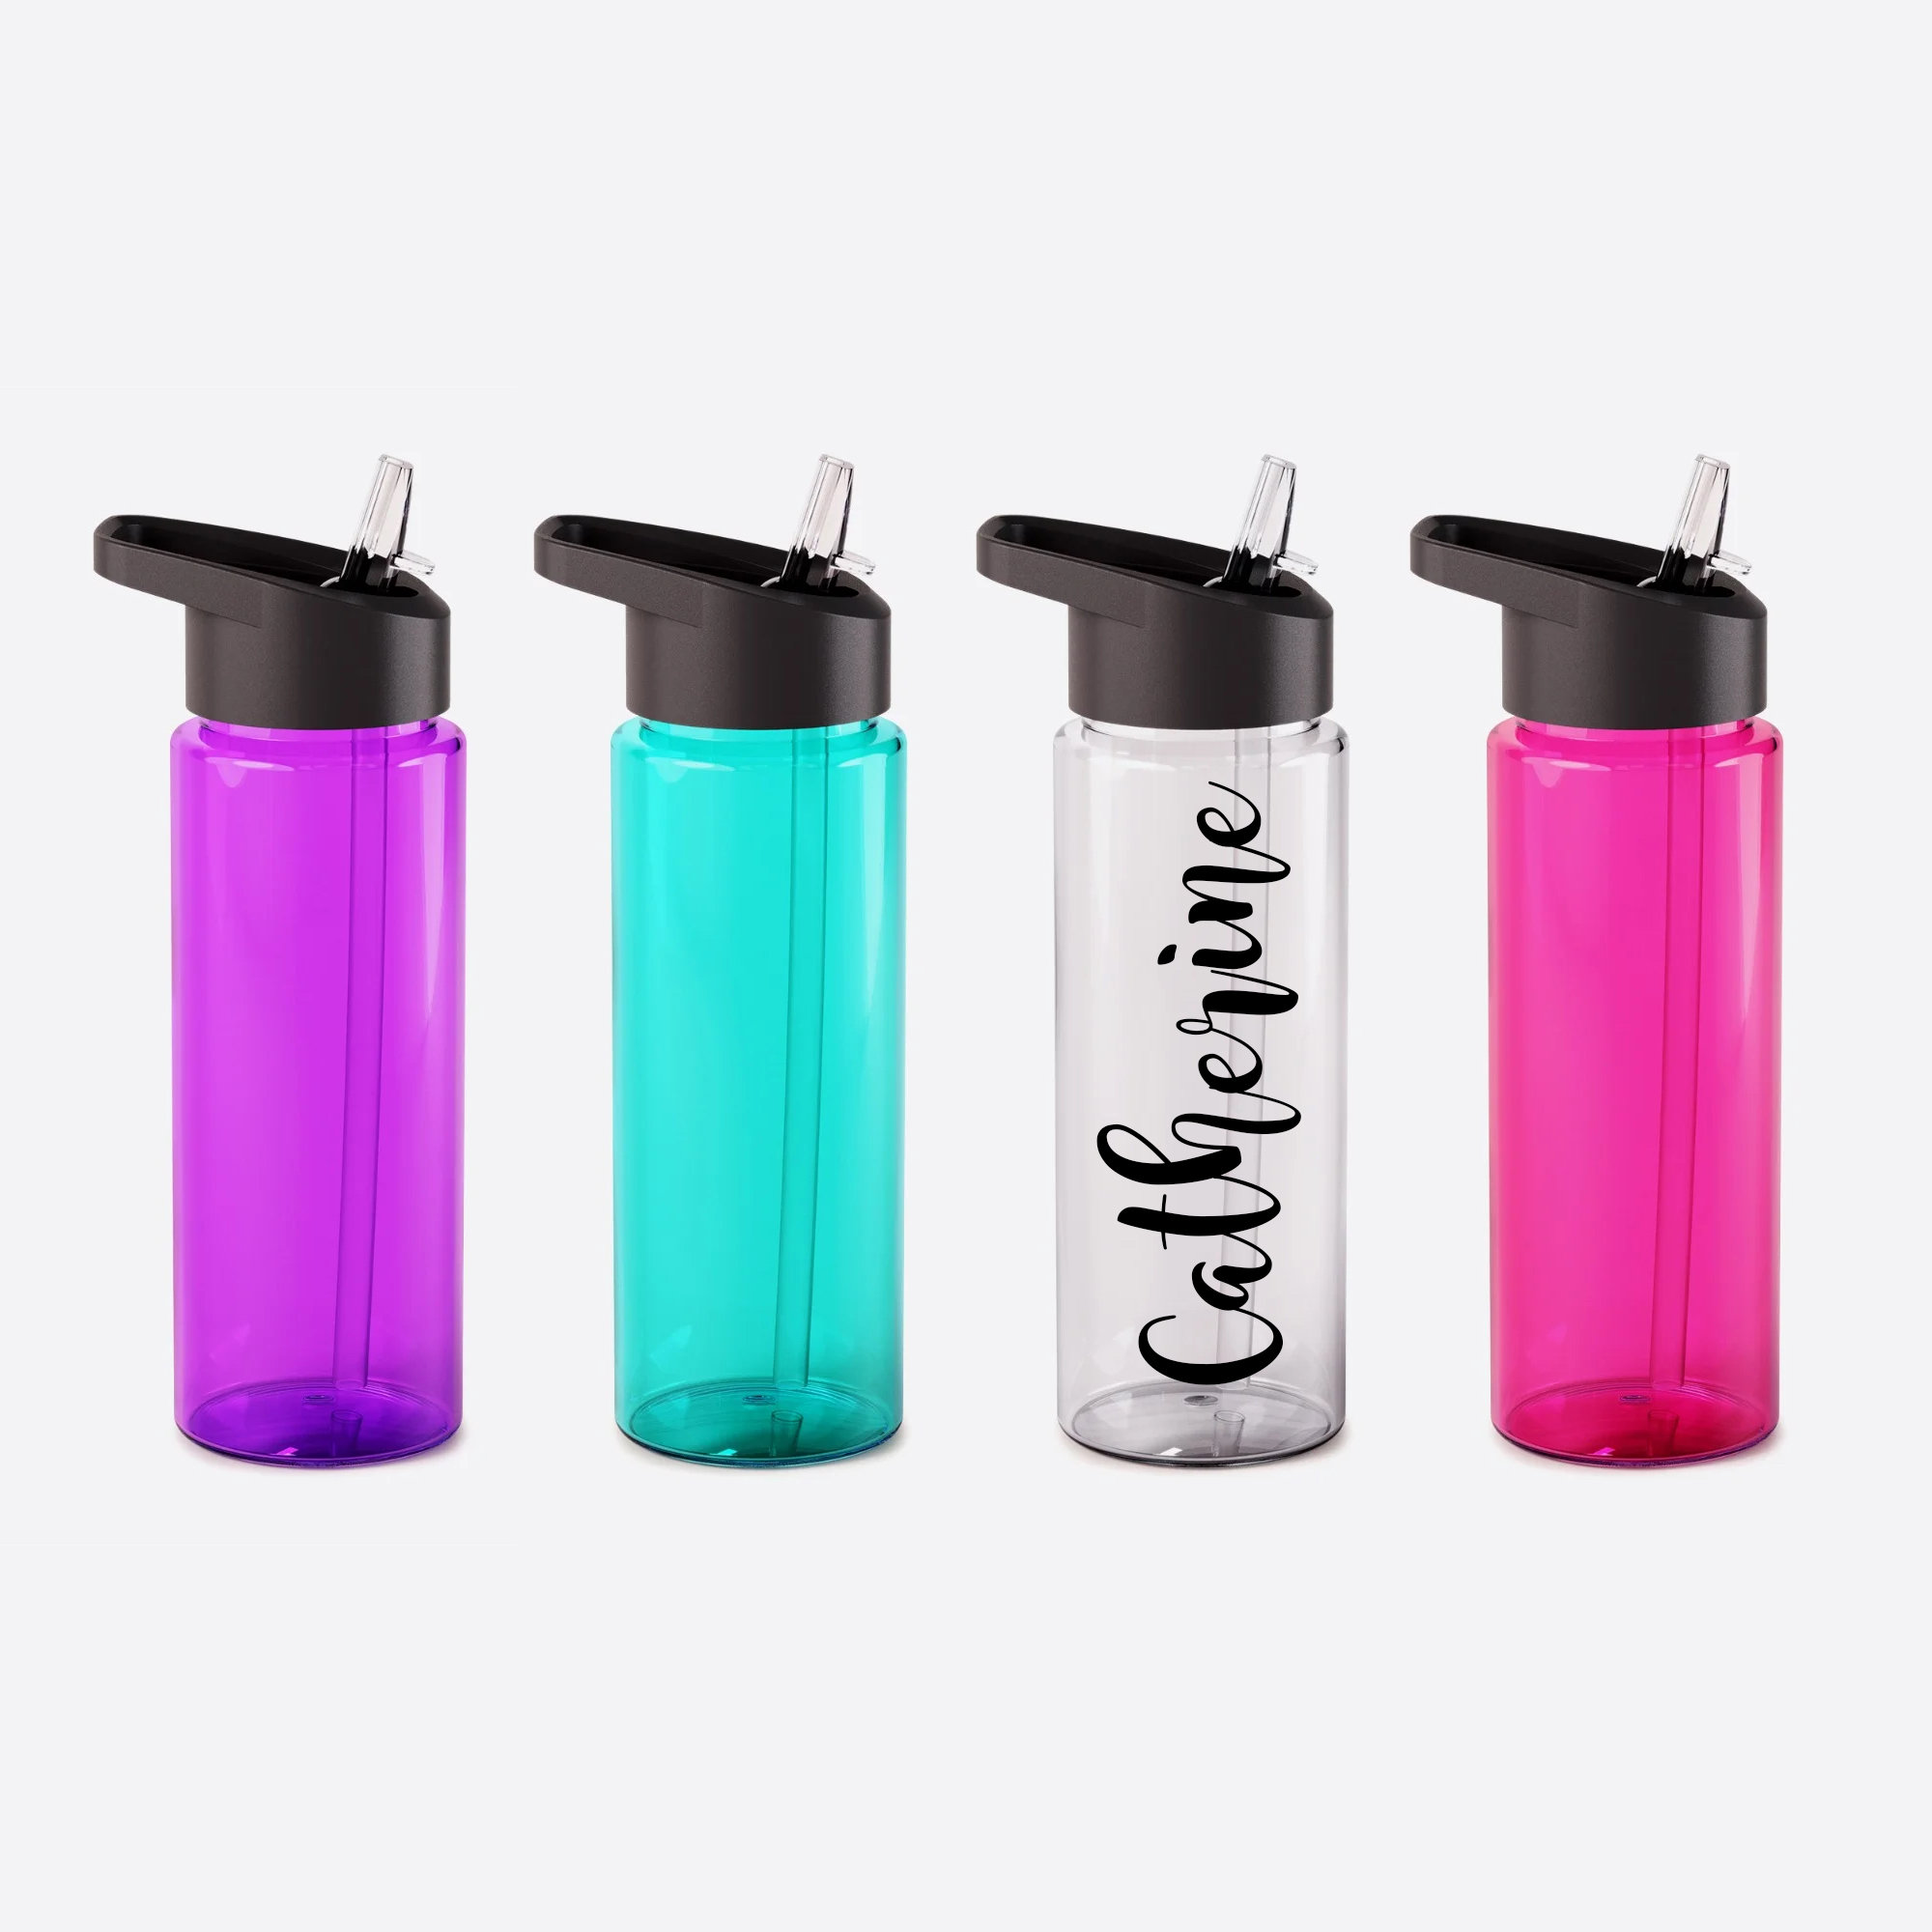 The Owala Freesip Stainless Steel Water Bottle Is 24% Off